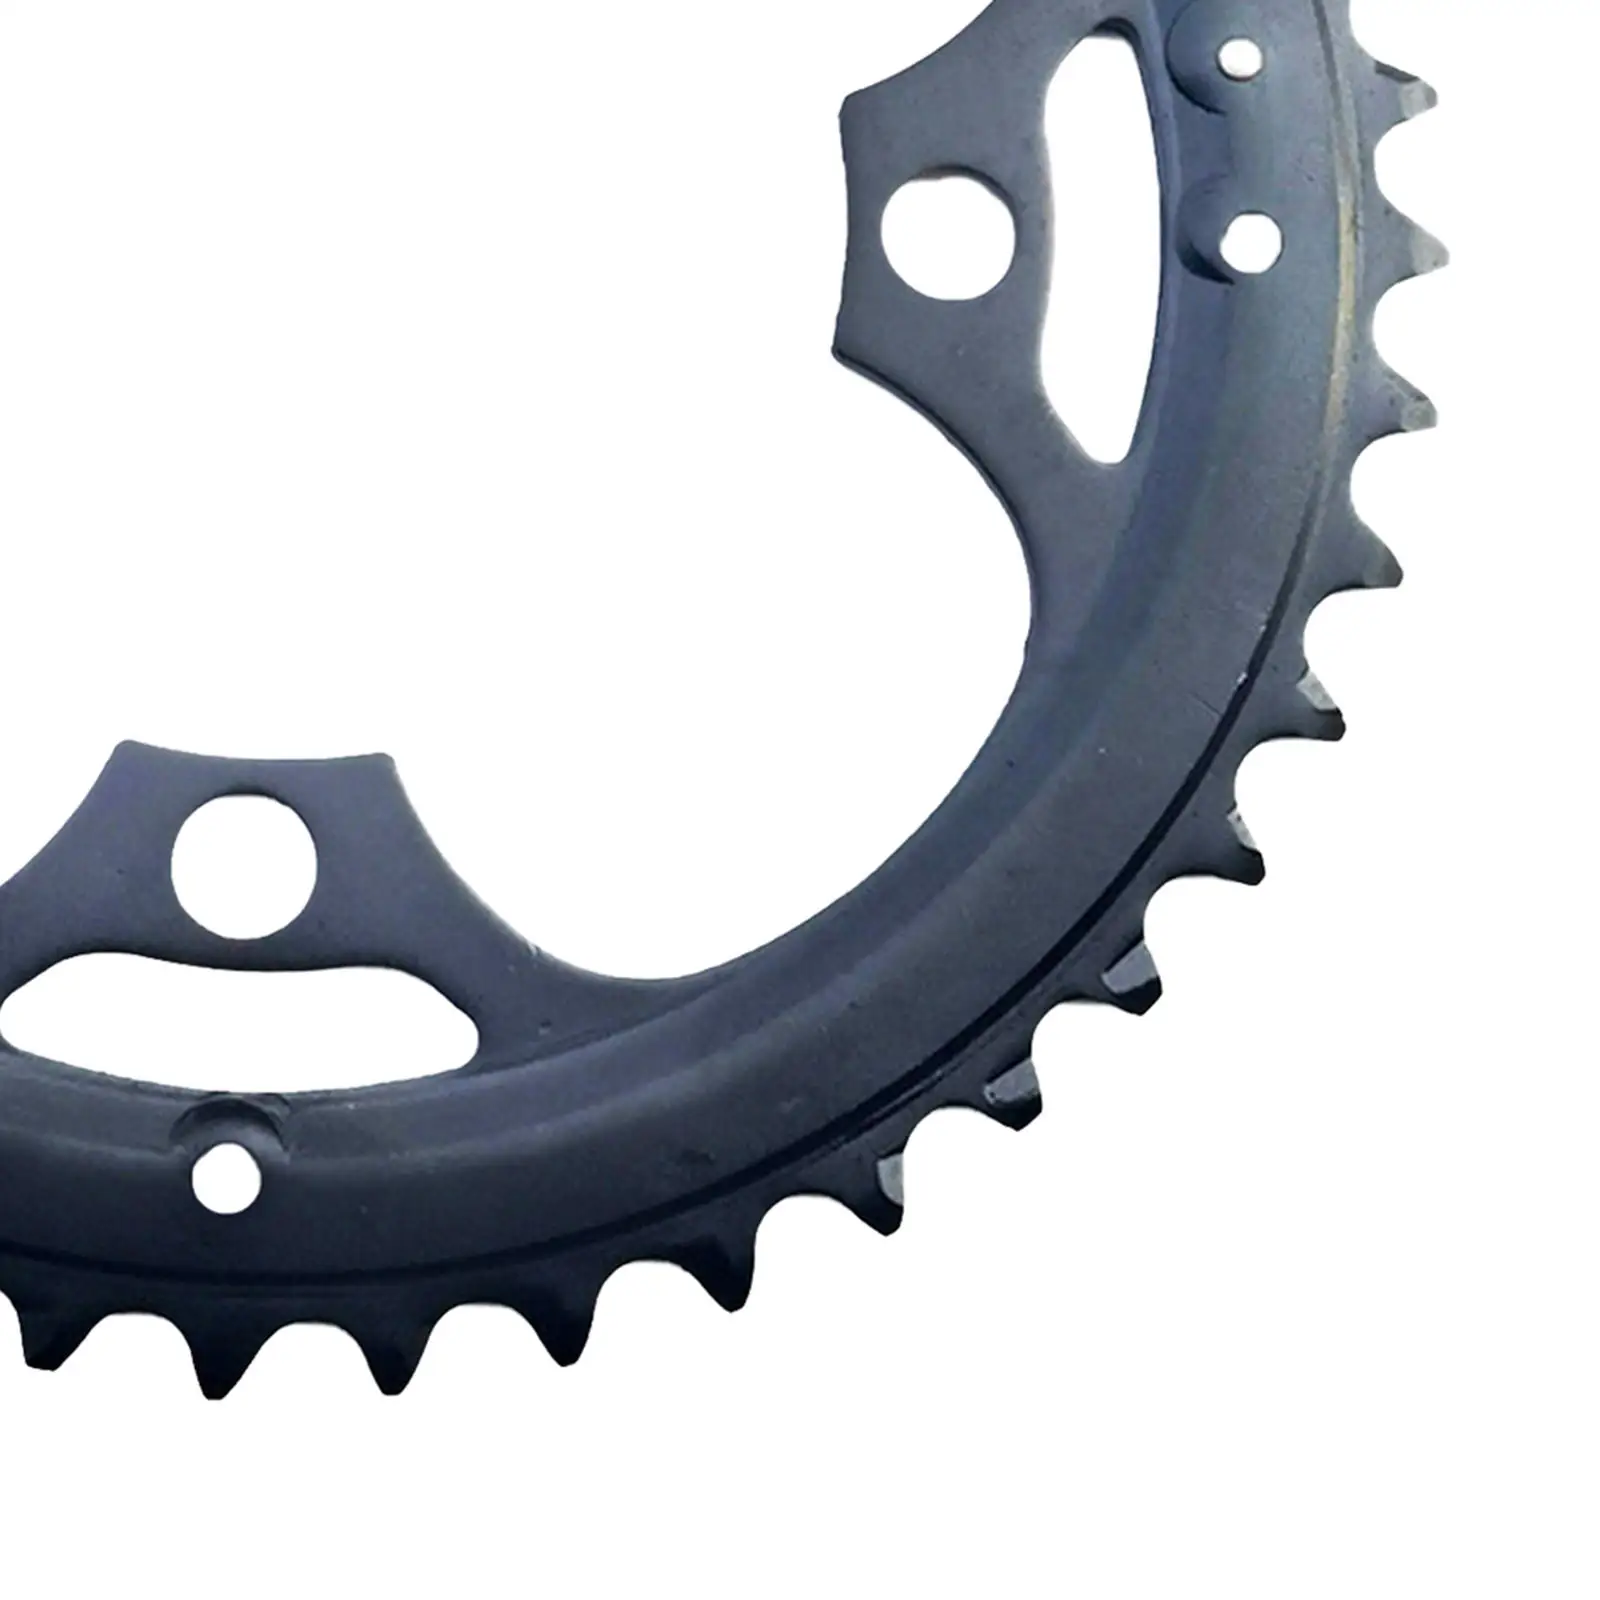 Bike Single Chainring 104 BCD Aluminum Alloy Black 44T Bicycle Narrow Wide Chainring for 8 9 Speed Fat Bikes Mountain Bike